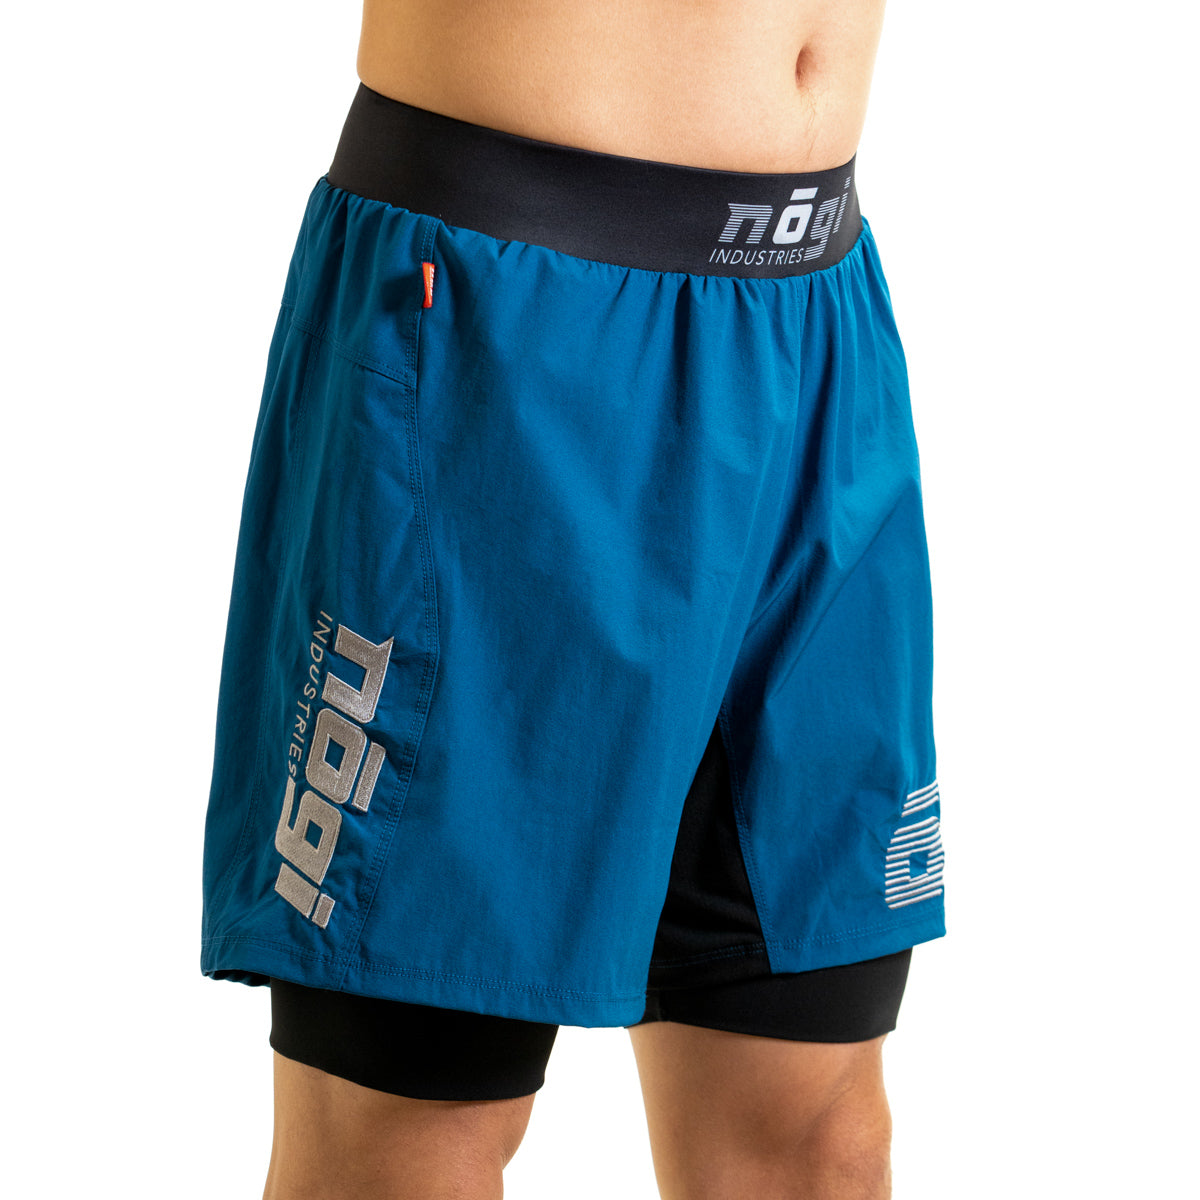 Ghost 7" Premium Lined Grappling Shorts - Ultramarine Blue Right View